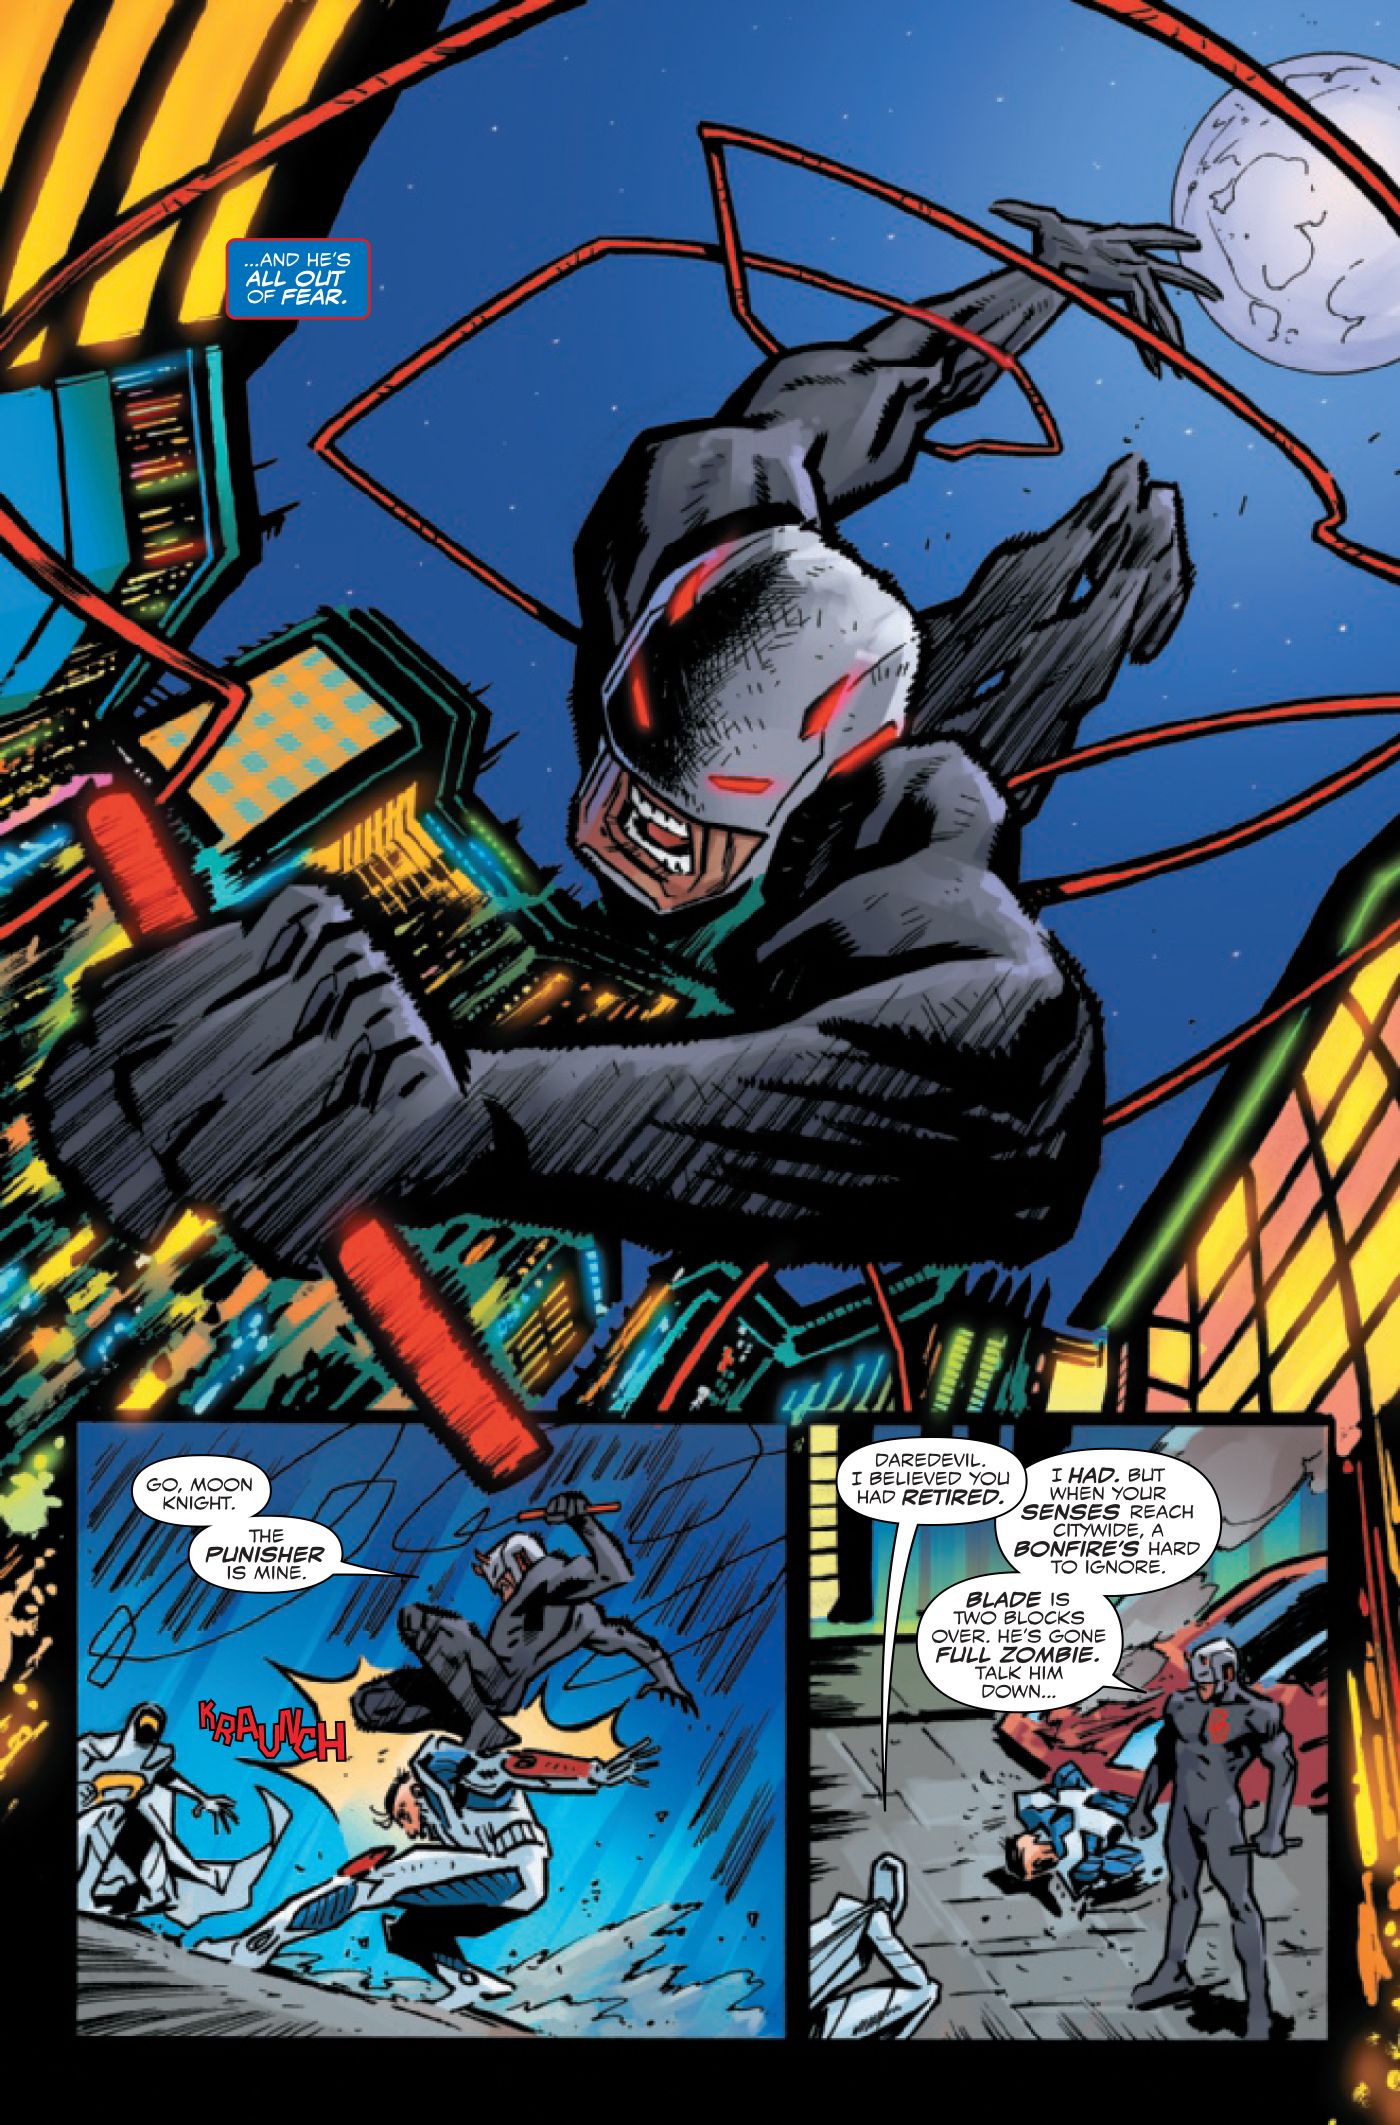 An early look at Spider-Man 2099: Dark Genesis #5 (2023) from Marvel Comics.